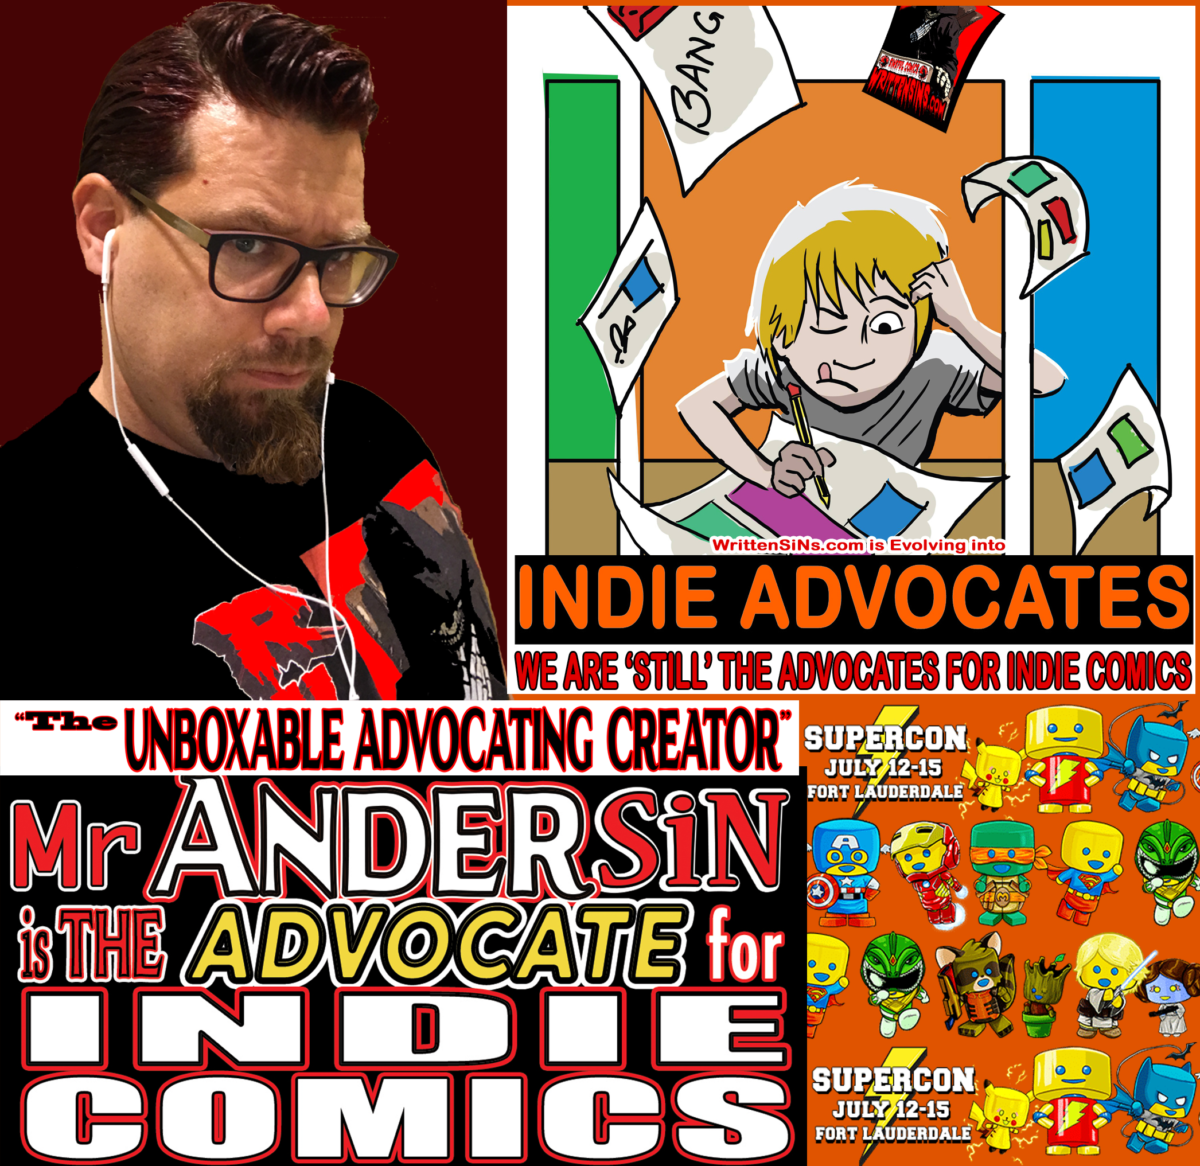 COMIC CON HIGHWAY EXITING with INDIE ADVOCATING  in FLORIDA::  INDIE ADVOCATES and MR Andersin will be SUPER ADVOCATING IN Fort Lauderdale  July 12-15  .